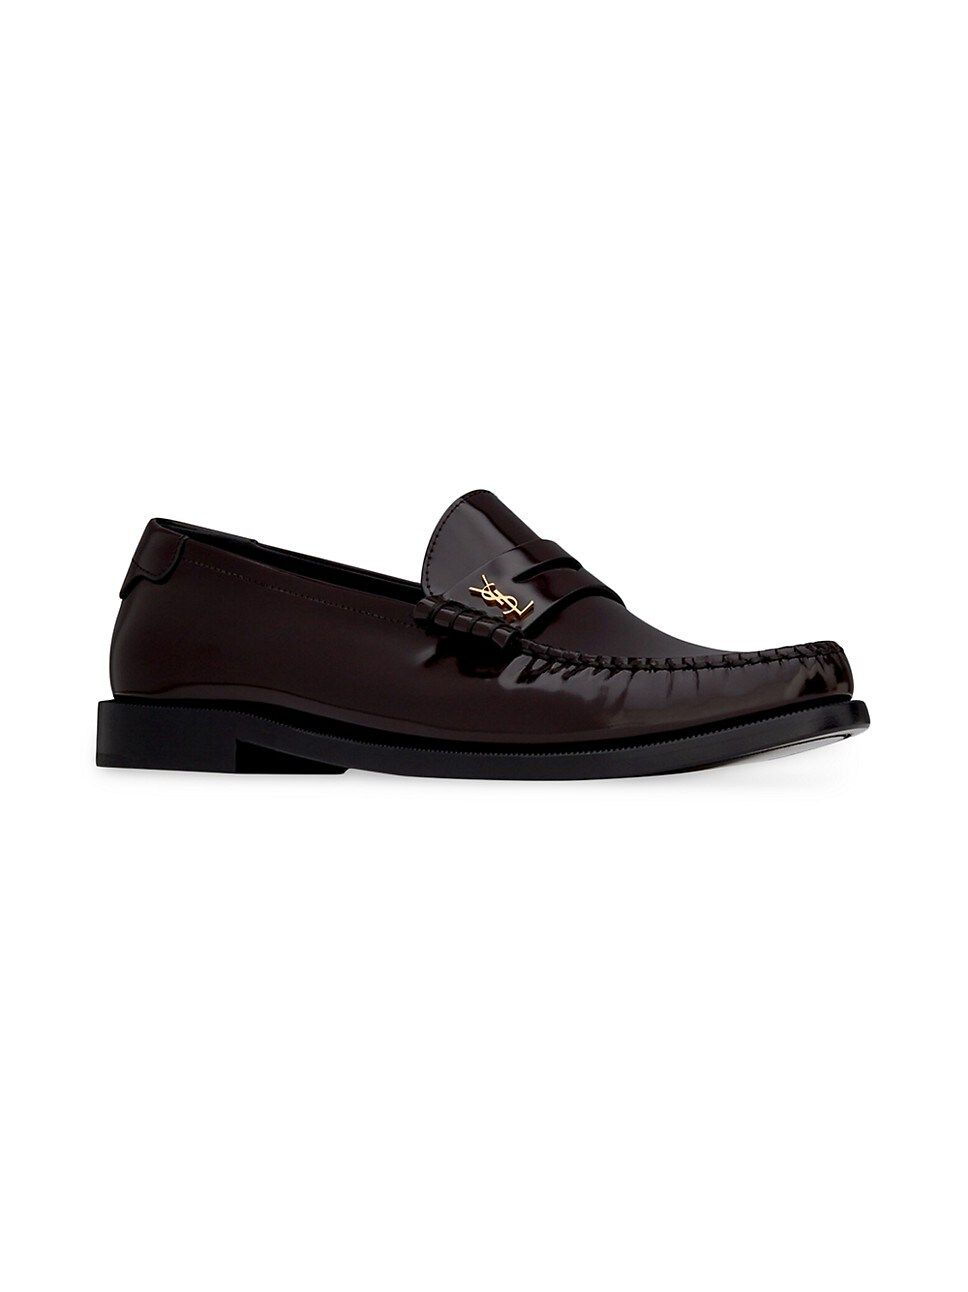 Le Loafer Penny Slippers In Smooth Leather | Saks Fifth Avenue